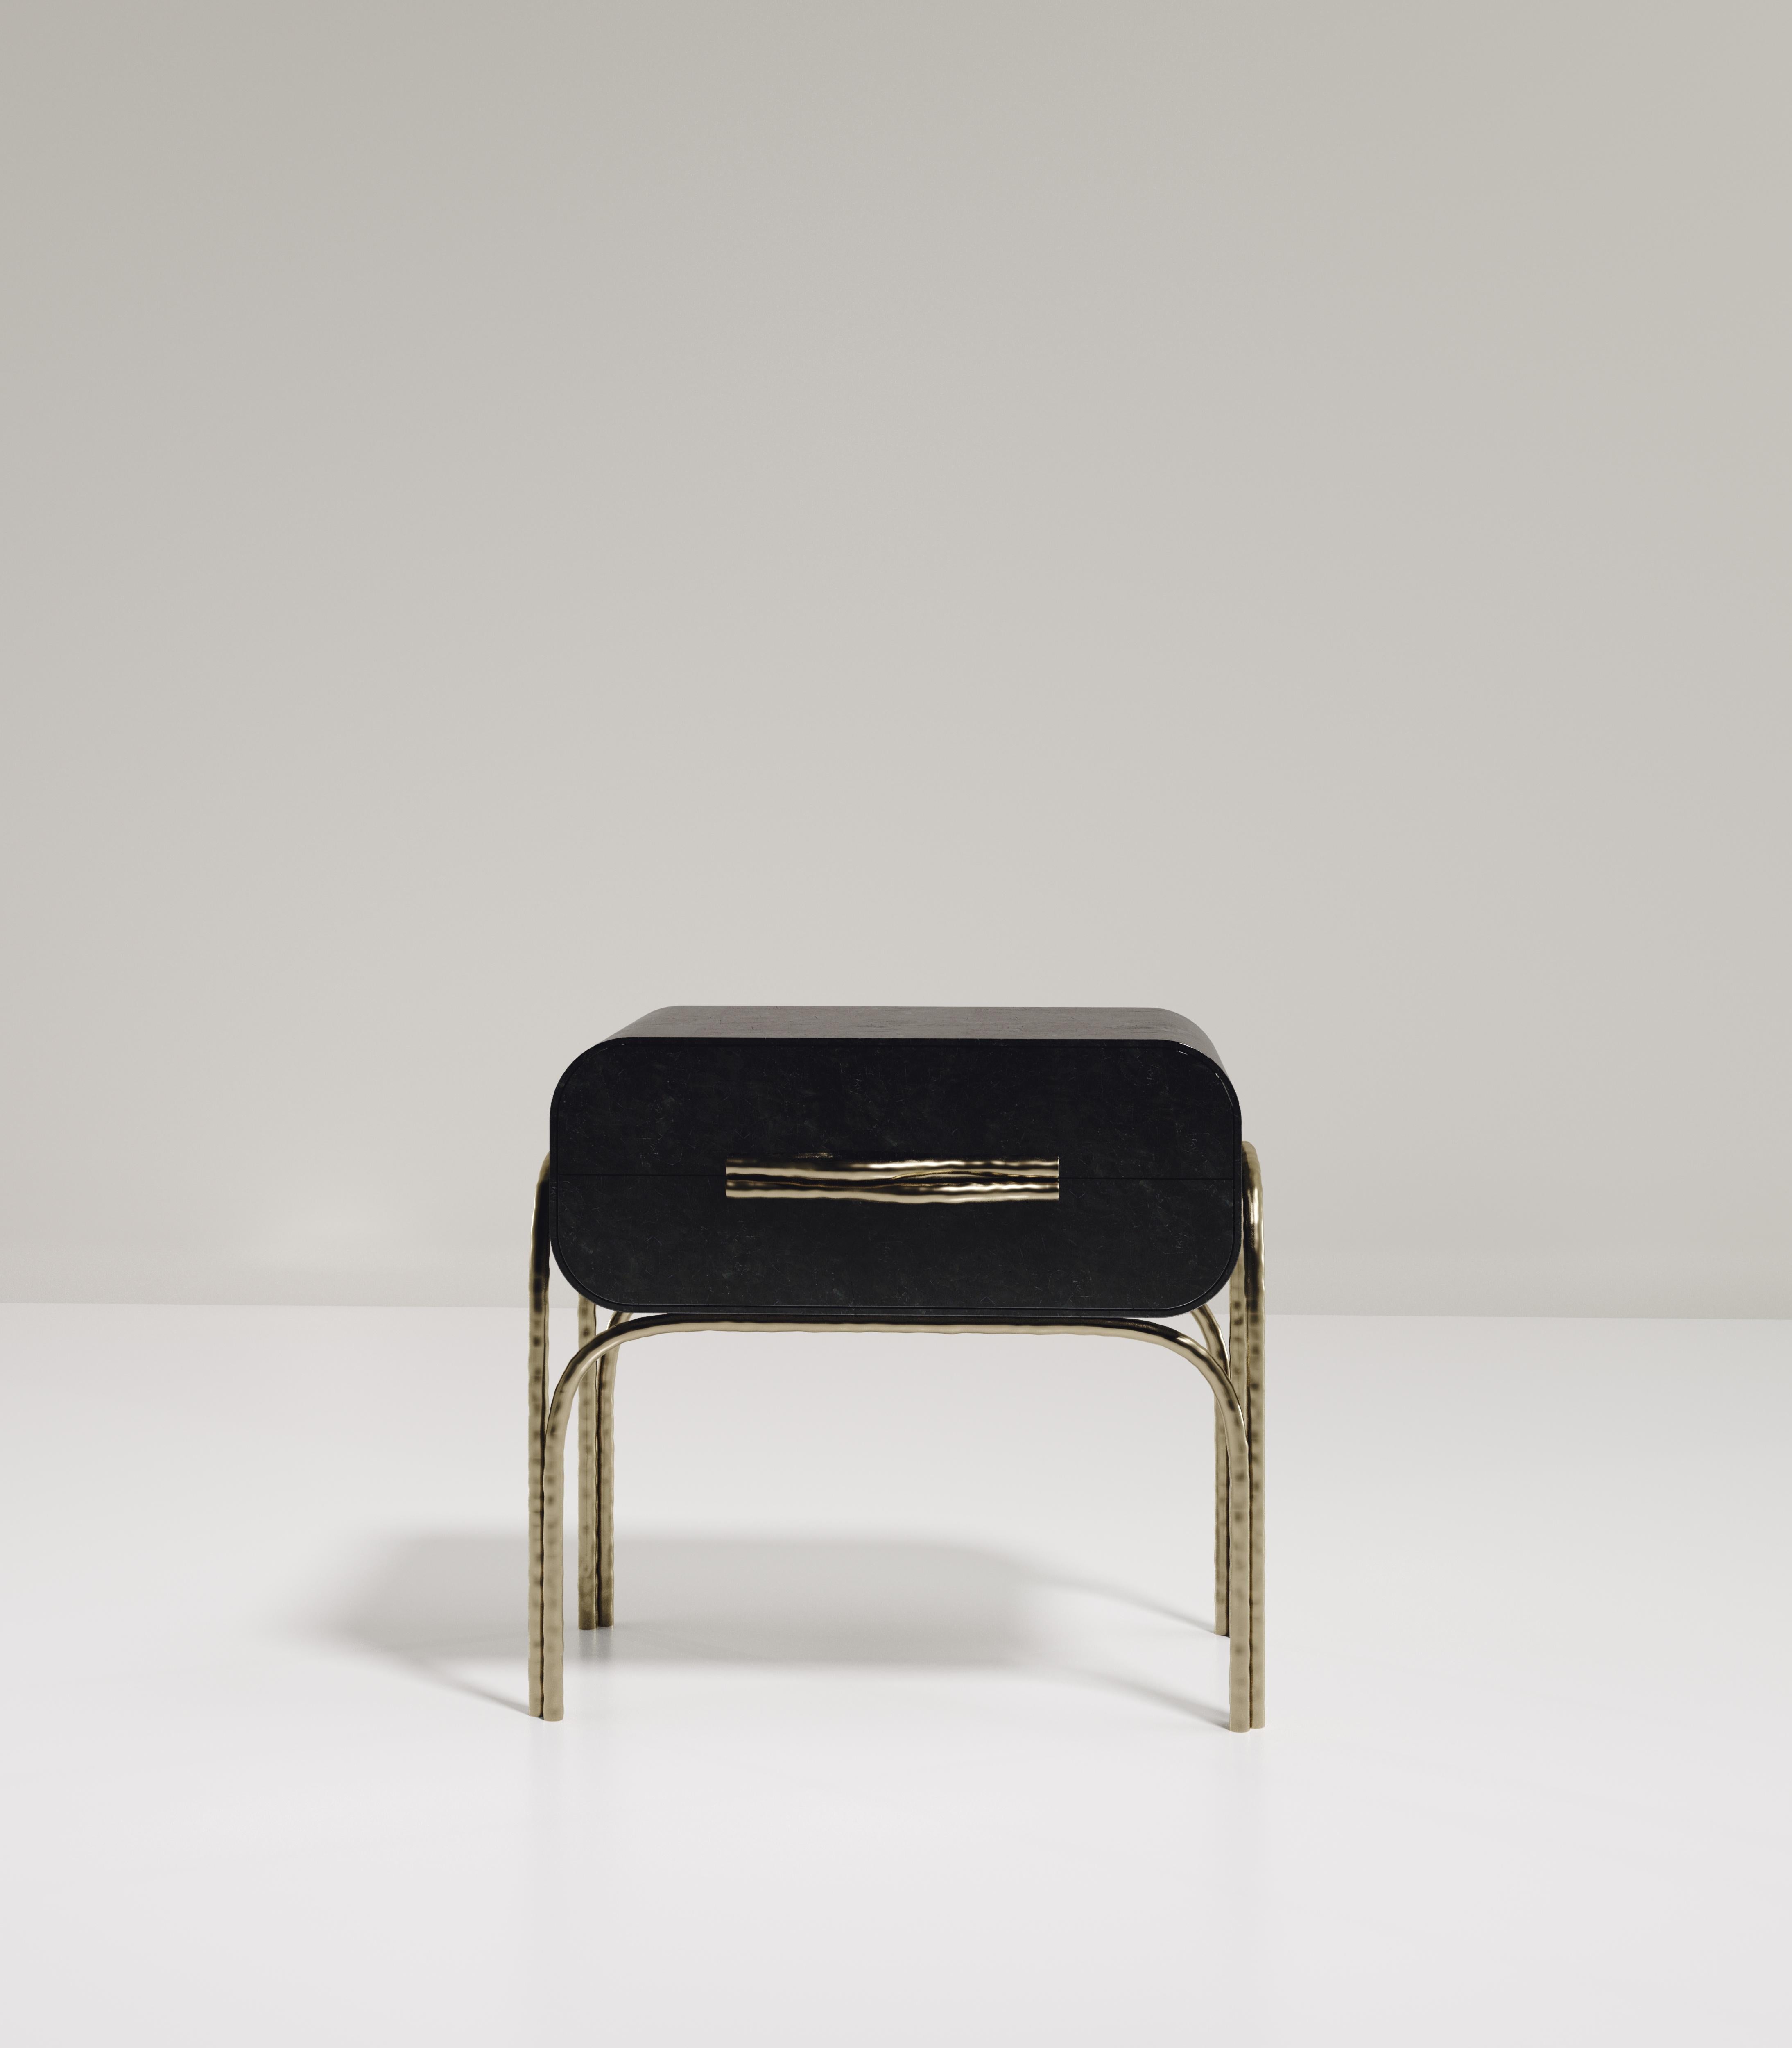 The Arianne side table by R&Y Augousti is an elegant piece for any space. The black pen shell top, with curved edges, sits on an organic bronze-patina frame. The intricate frame and legs have a 